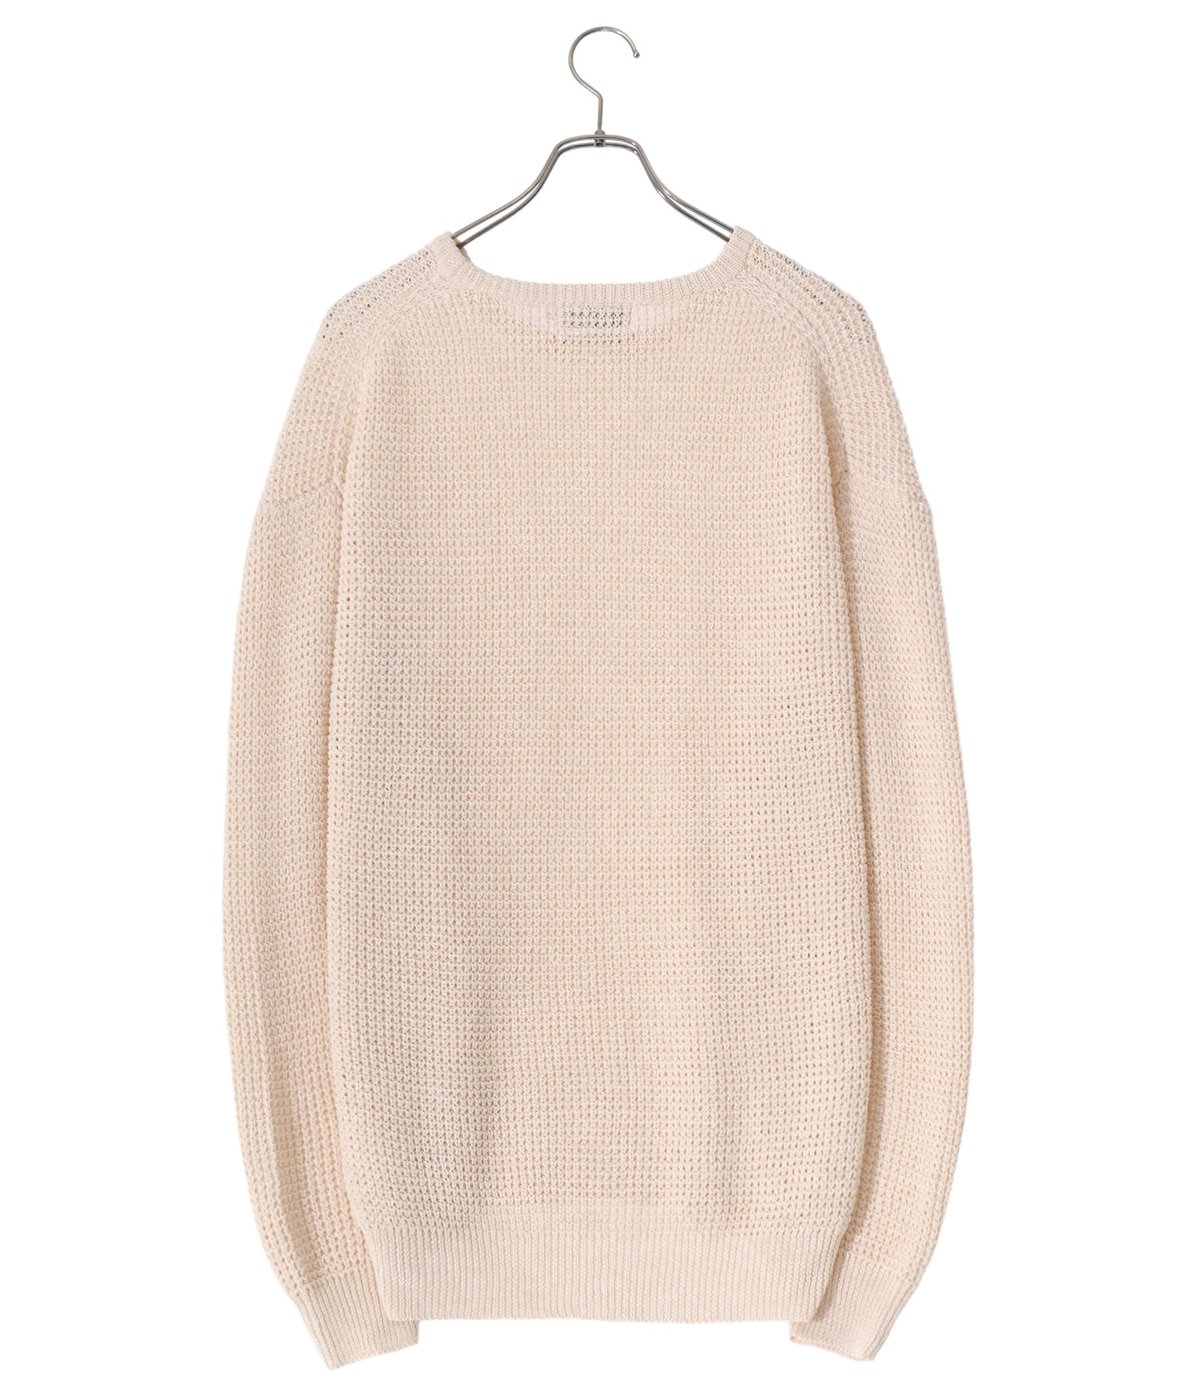 Linen SOLOTEX Knit Crew Neck | Graphpaper(グラフペーパー 